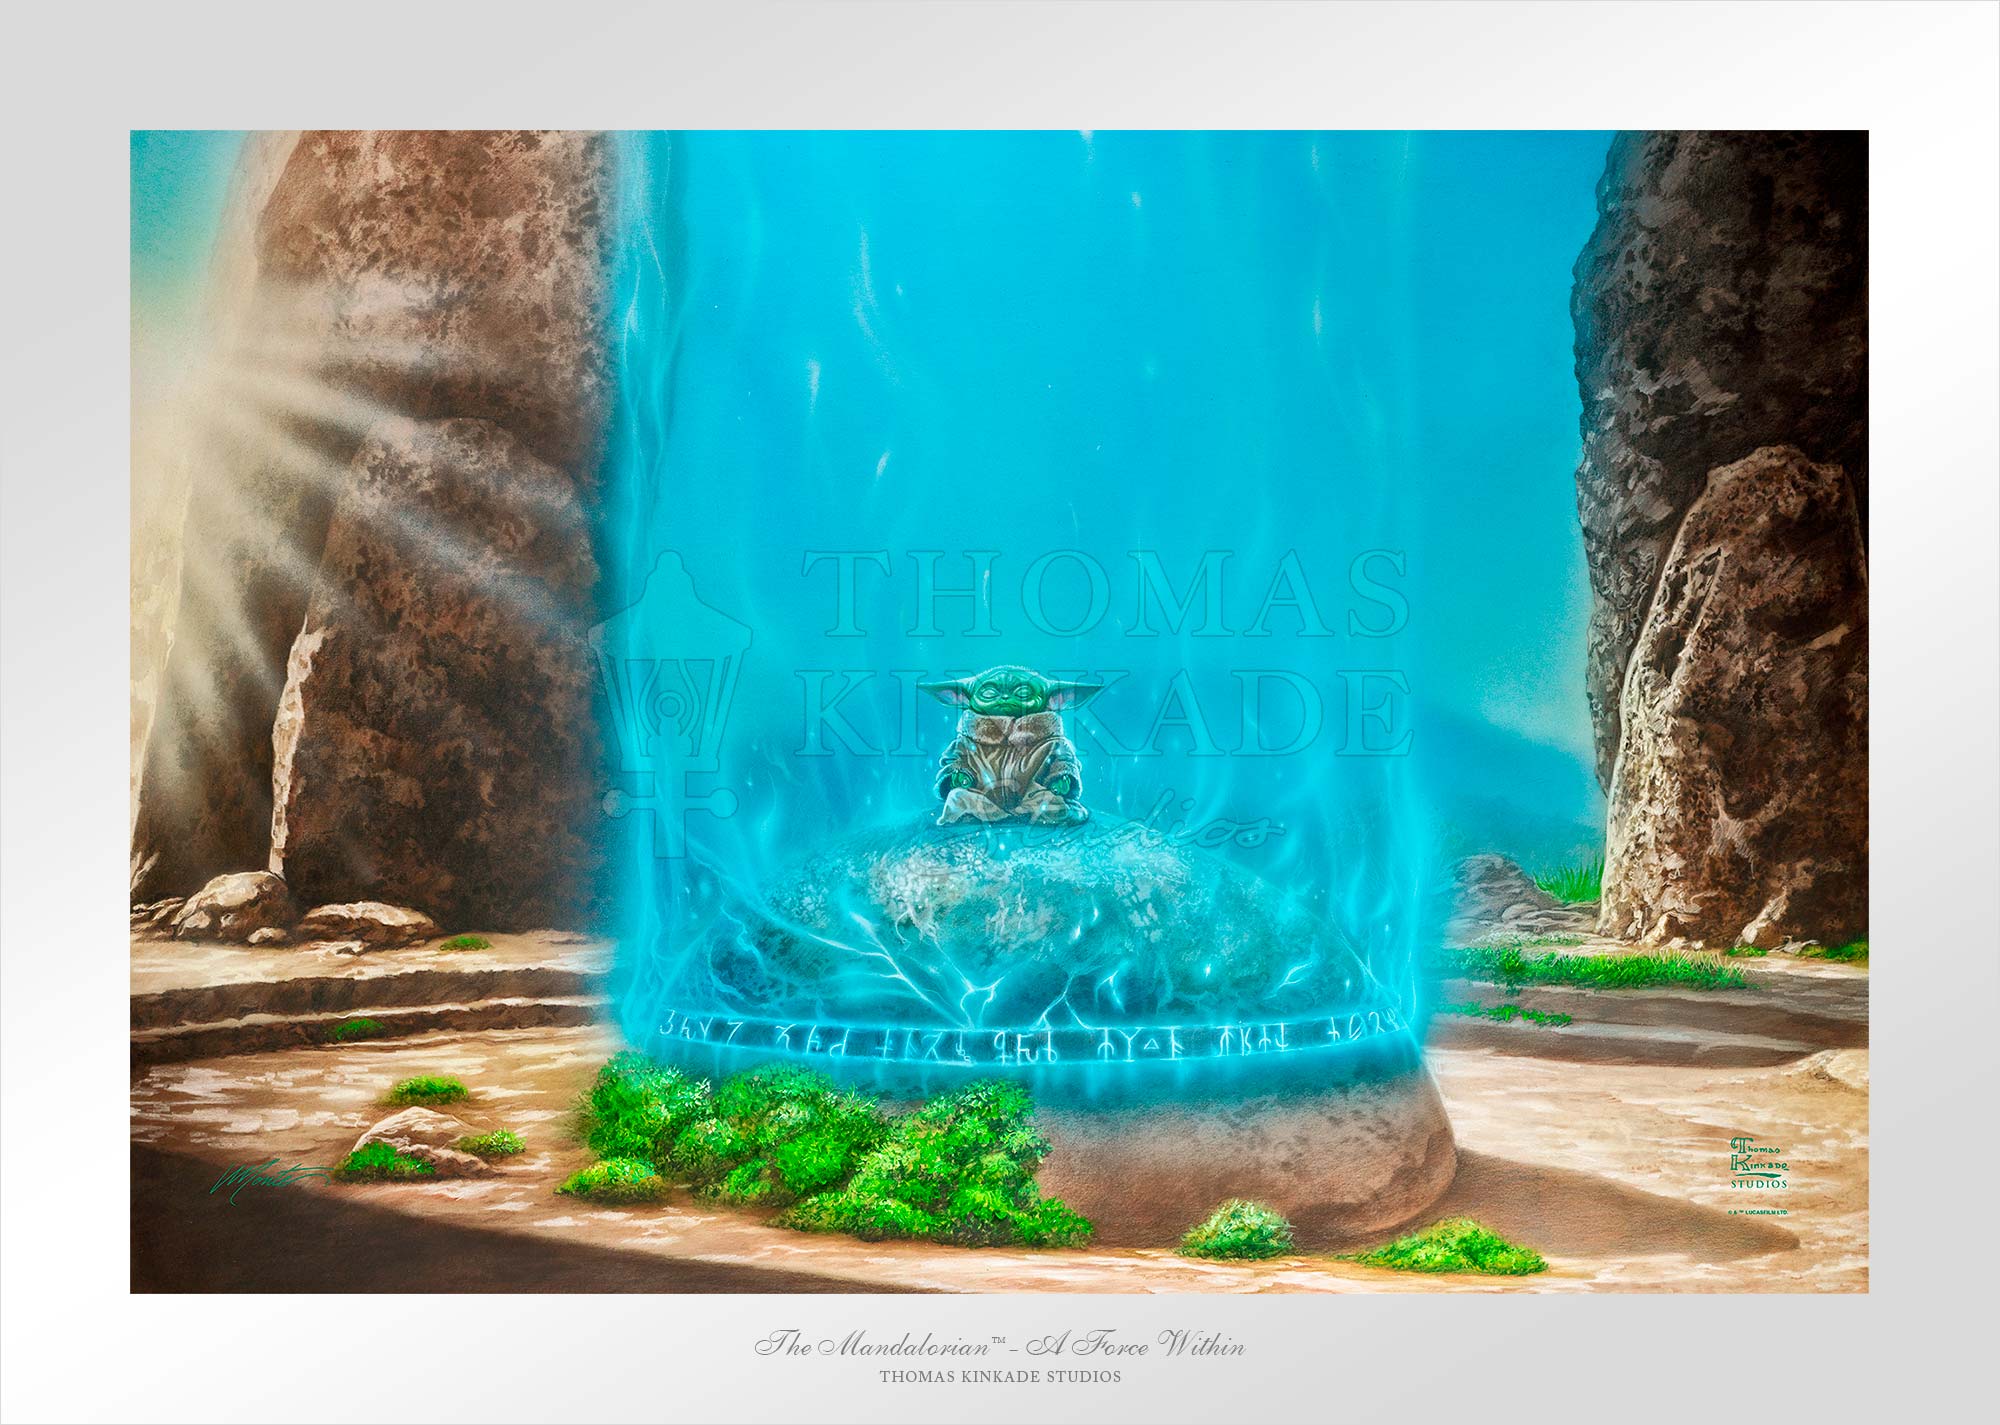 The Mandalorian - A Force Within by Thomas Kinkade Studios.  Once placed upon the ancient Jedi™ seeing stone, Grogu™ “activates” the stone to make the connection with the galaxy’s existing Jedi through the Force. - Unframed